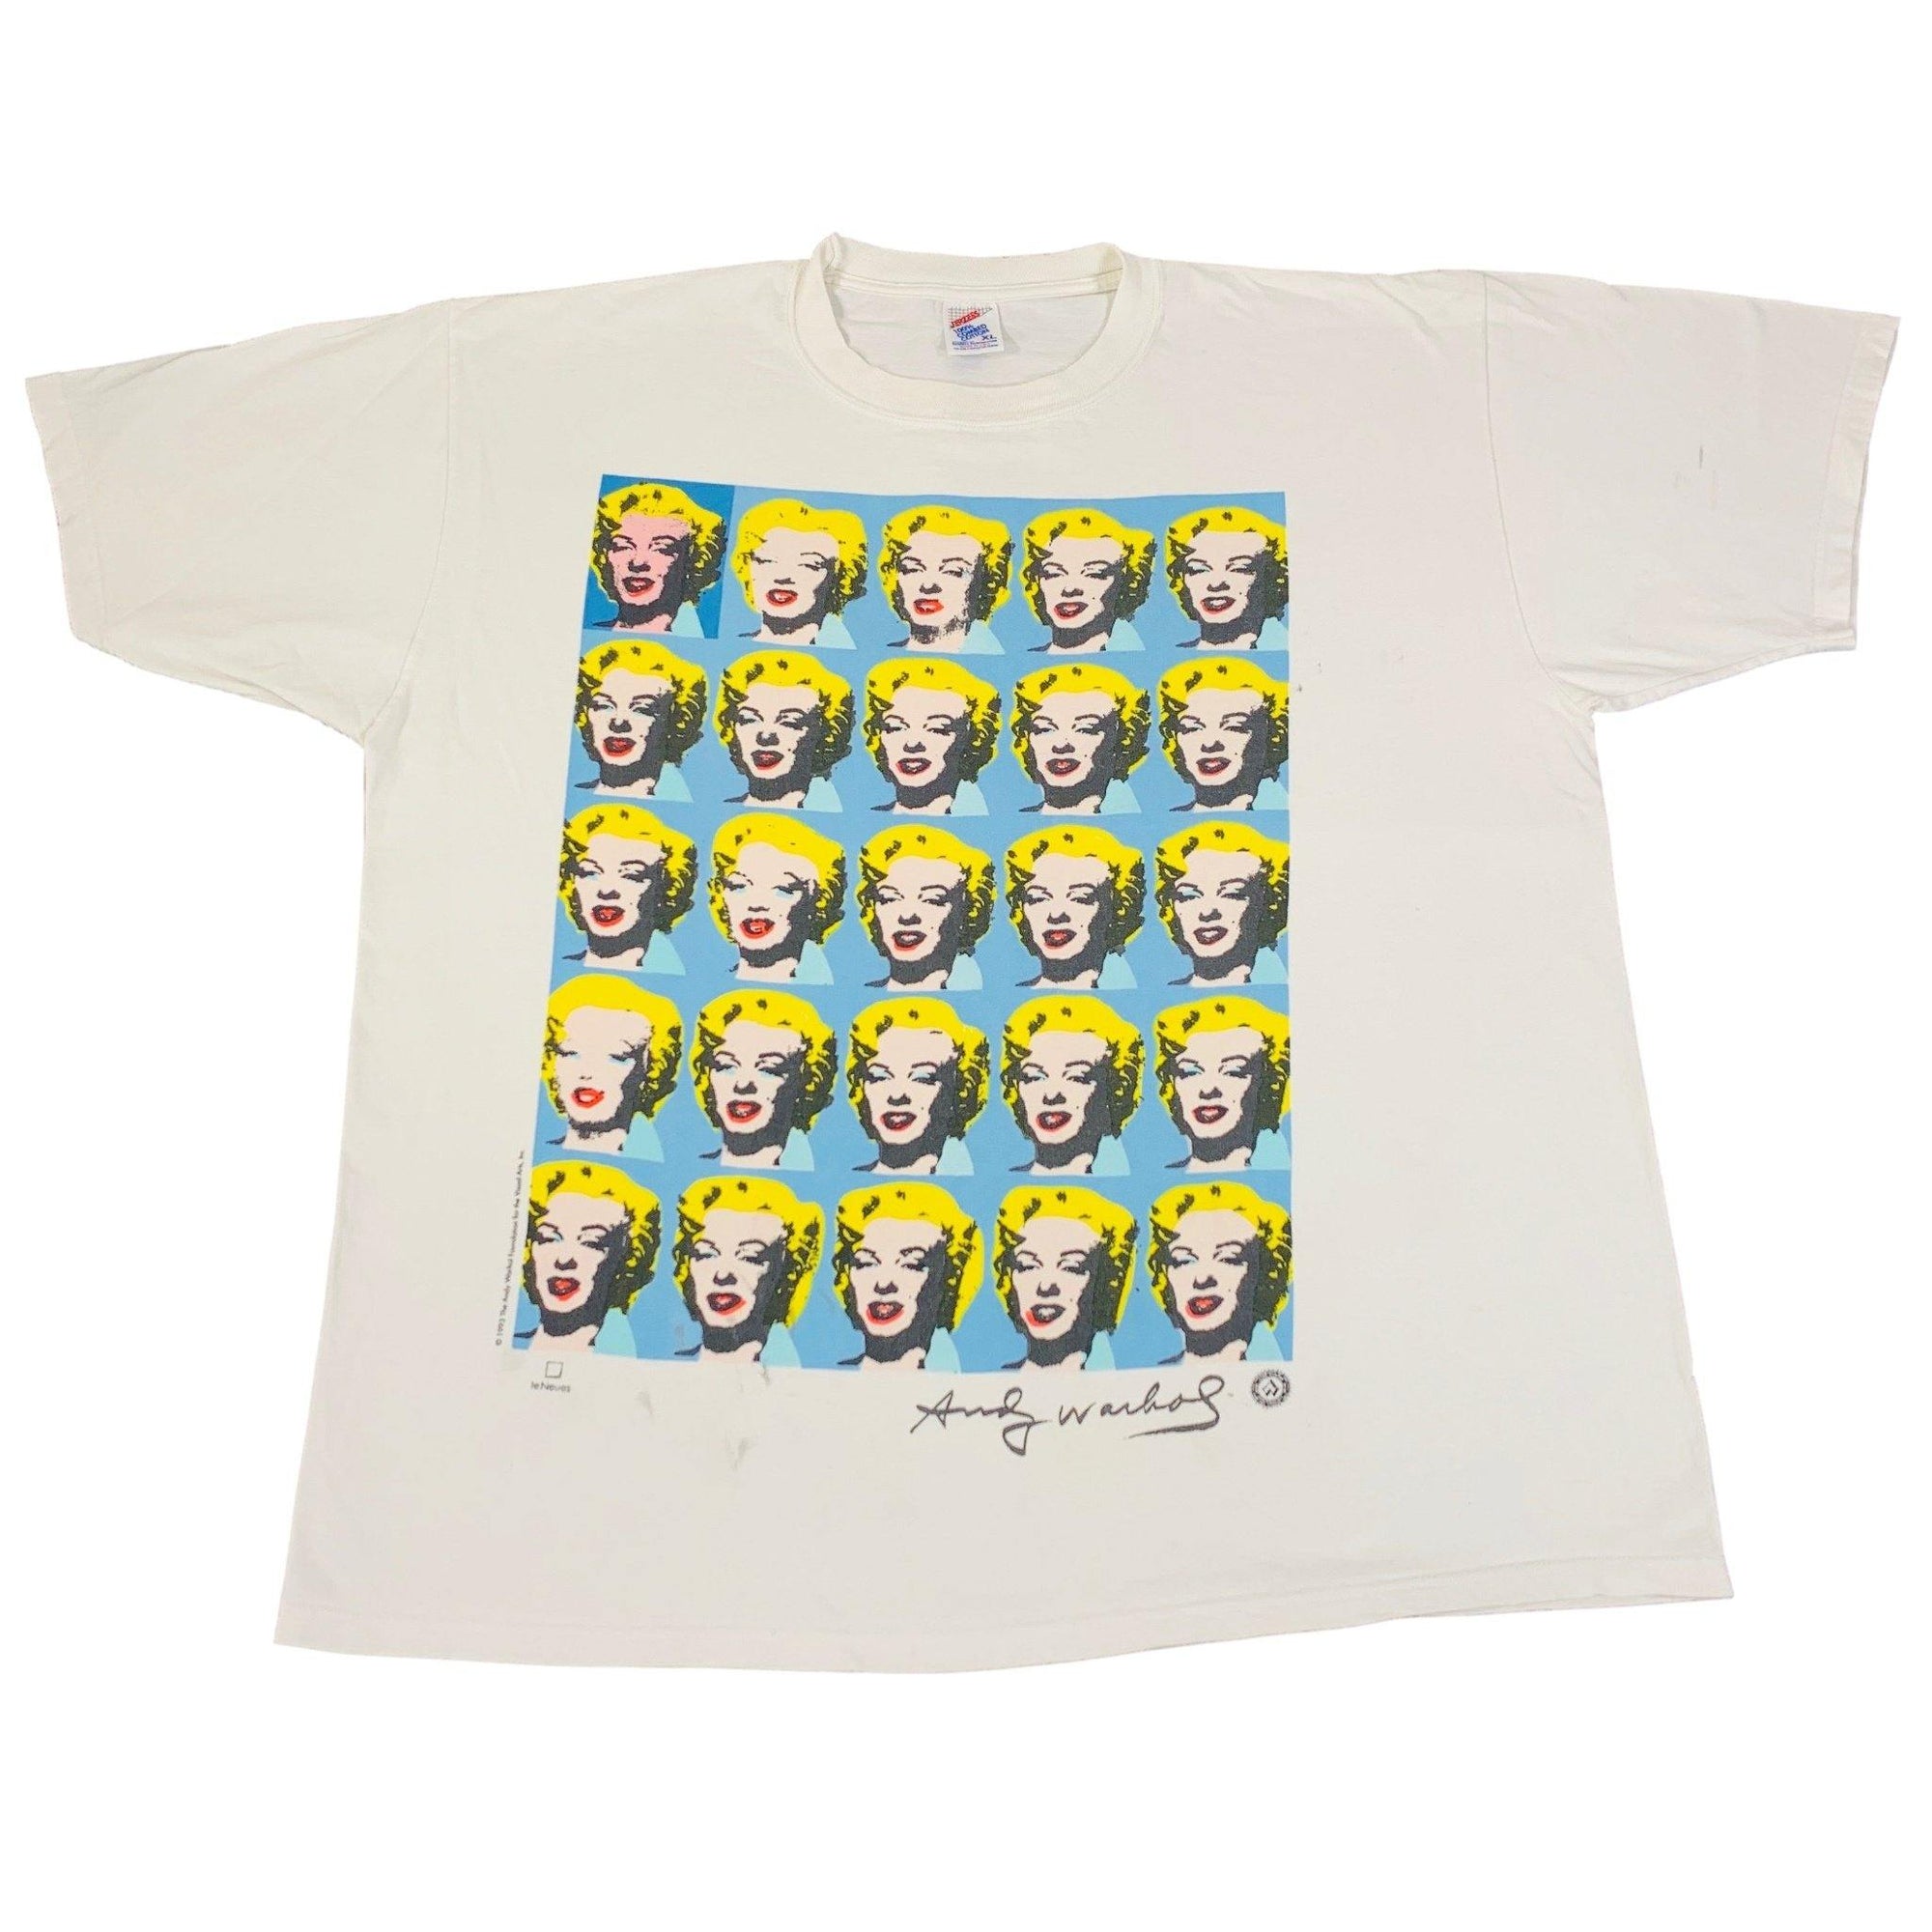 Vintage Andy Warhol Marilyn Monroe "Foundation For The Visual Arts" T-Shirt - jointcustodydc